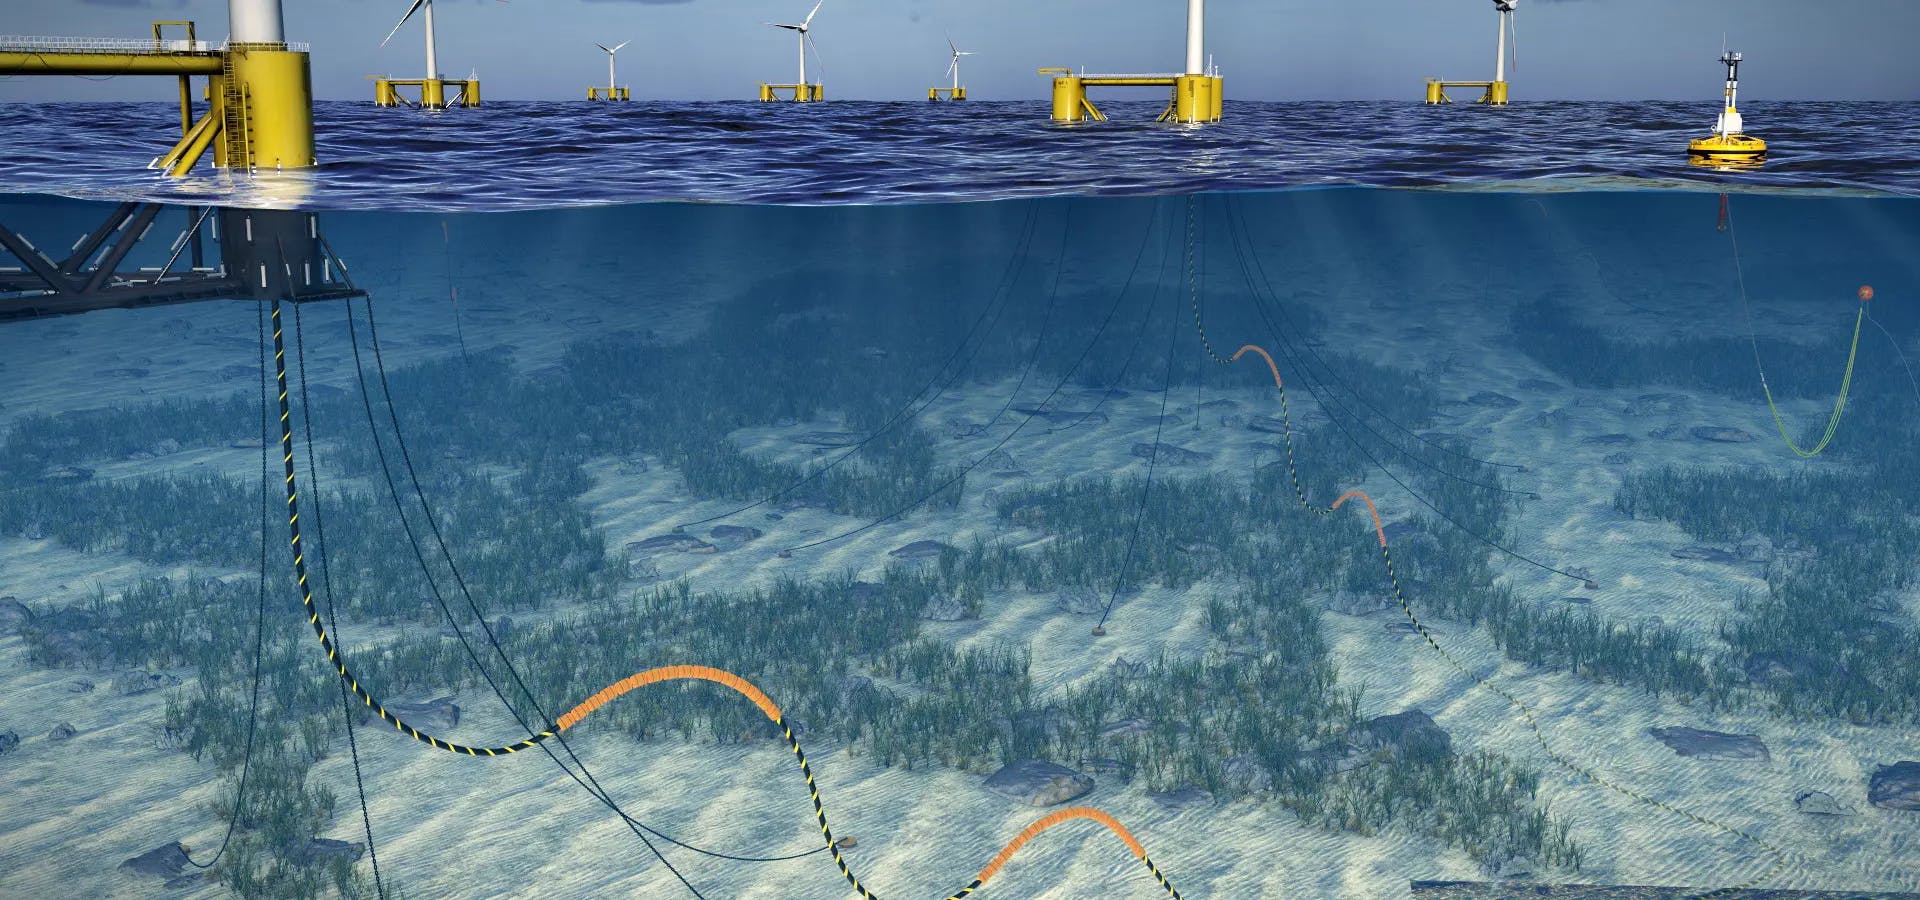 Floating wind farm graphic